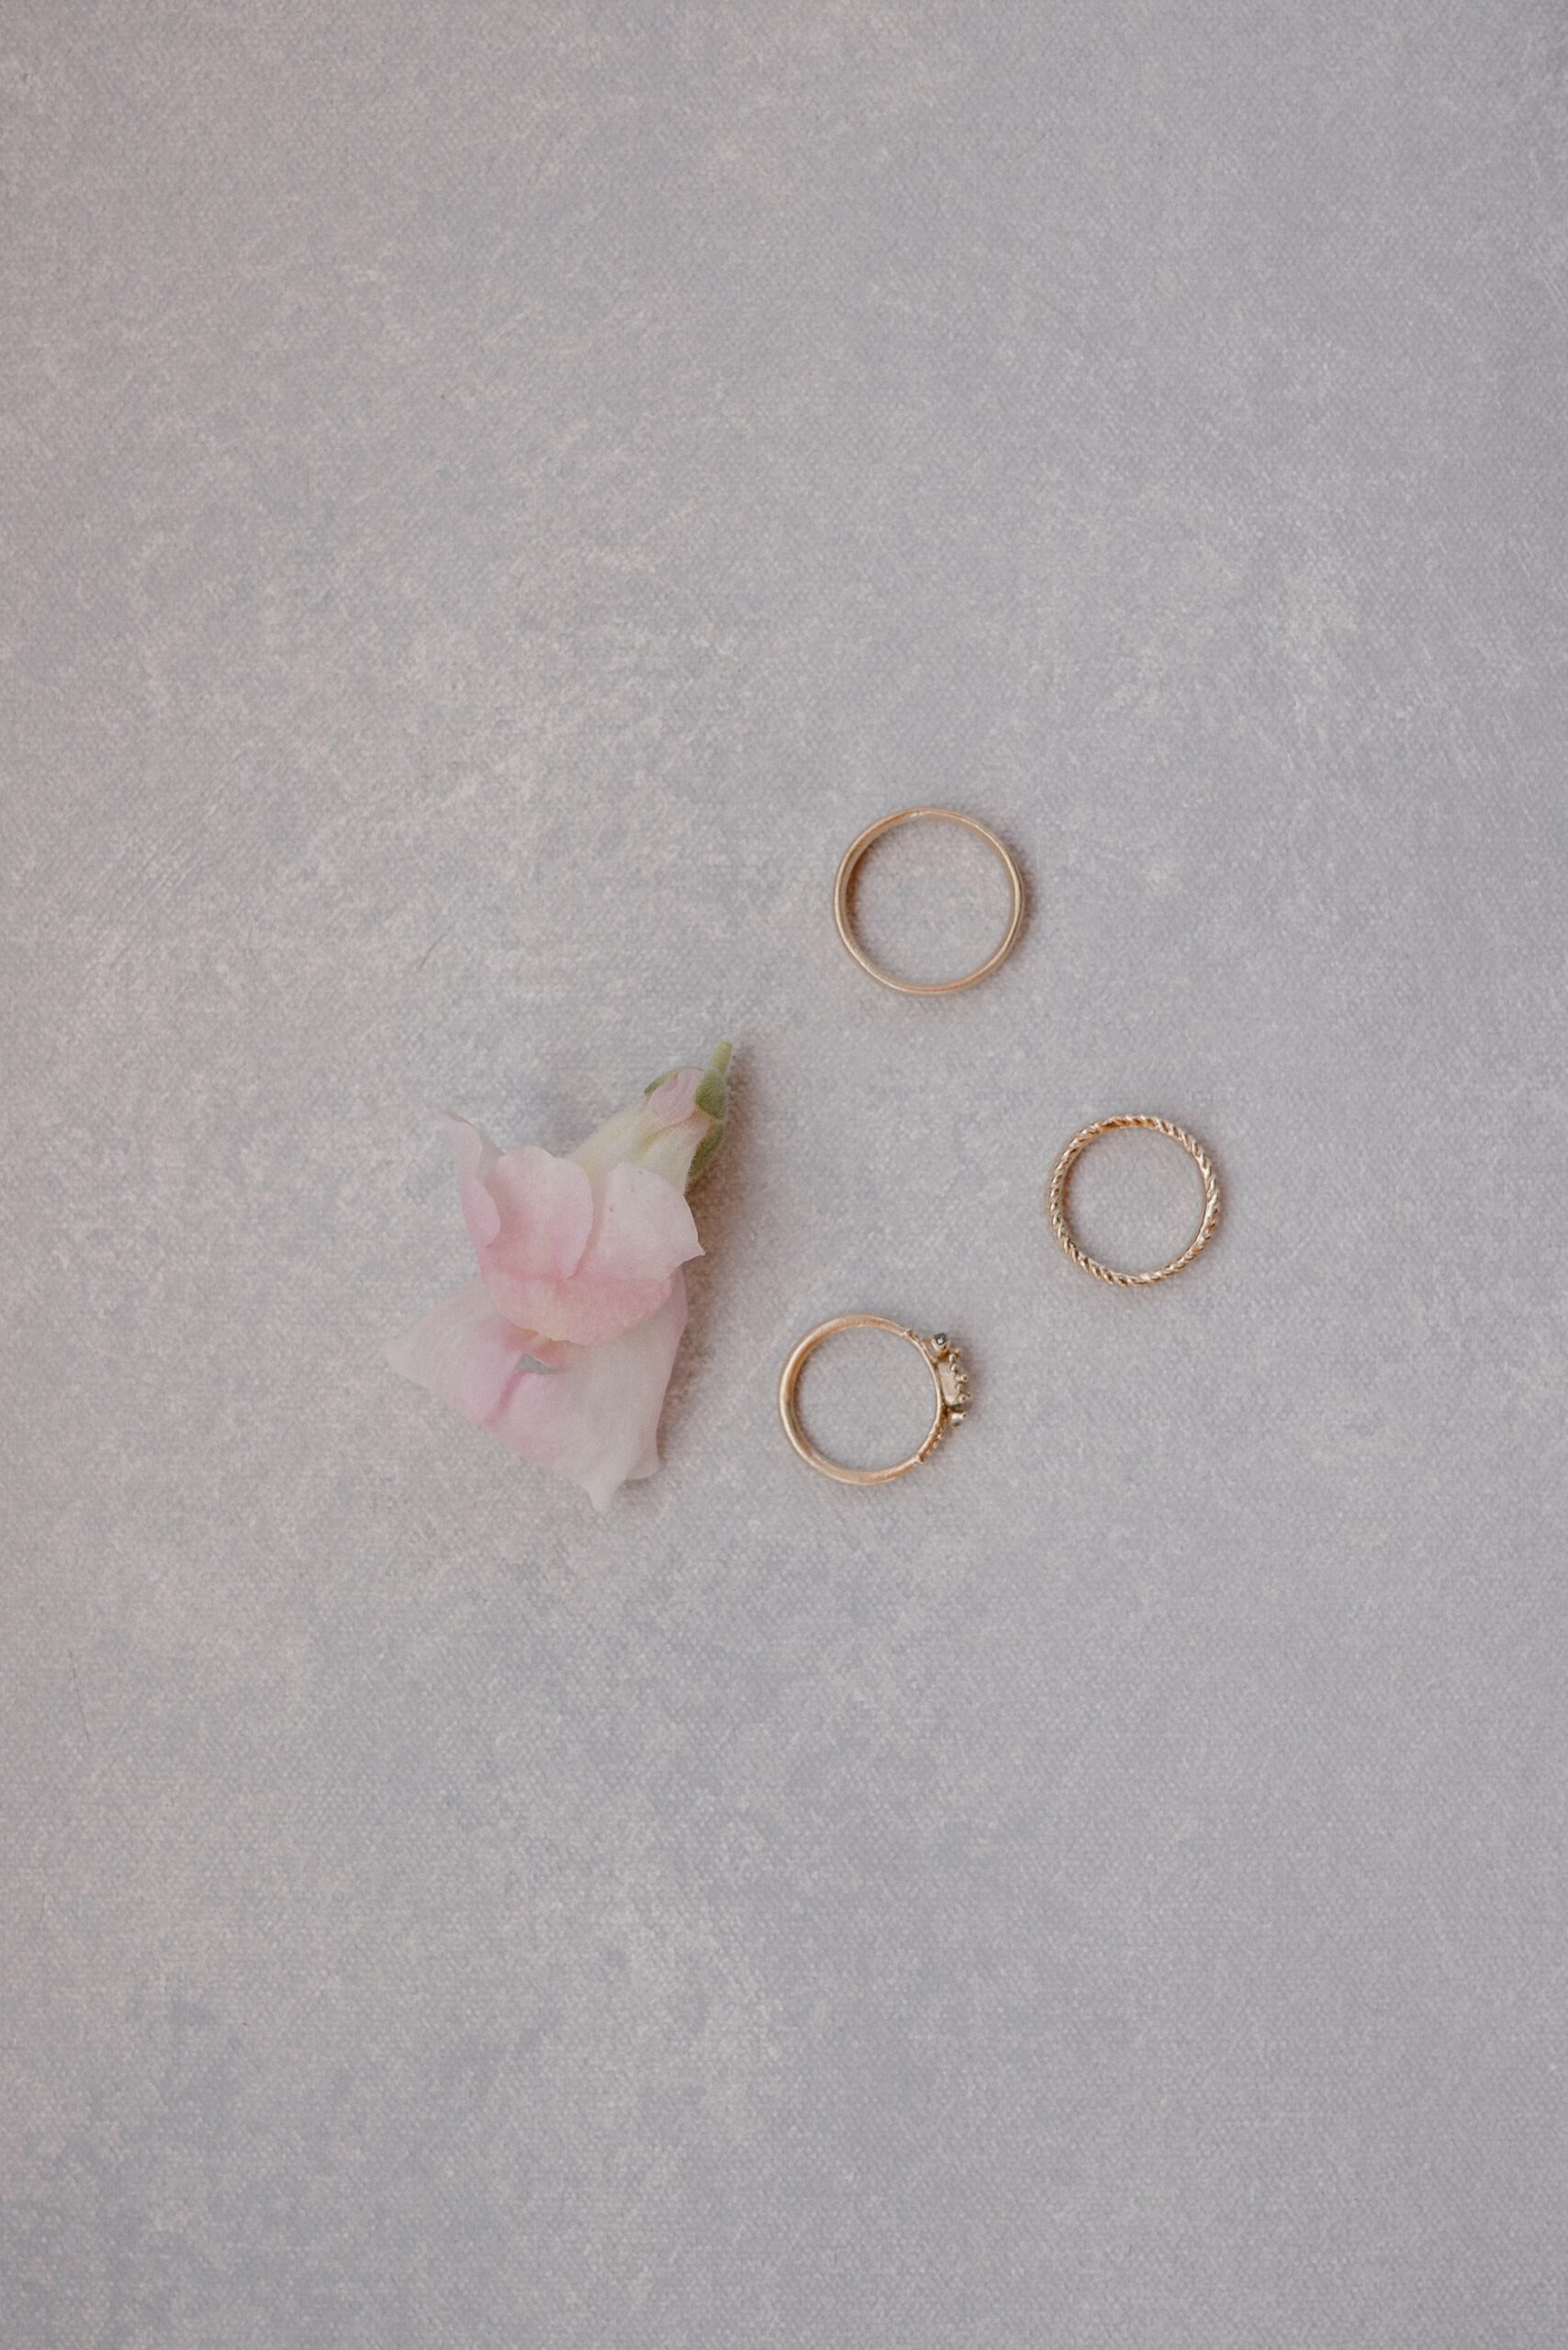 A color photo of a bride's wedding rings laid on a solid background with a single flower. Photo by Ashley Joyce.